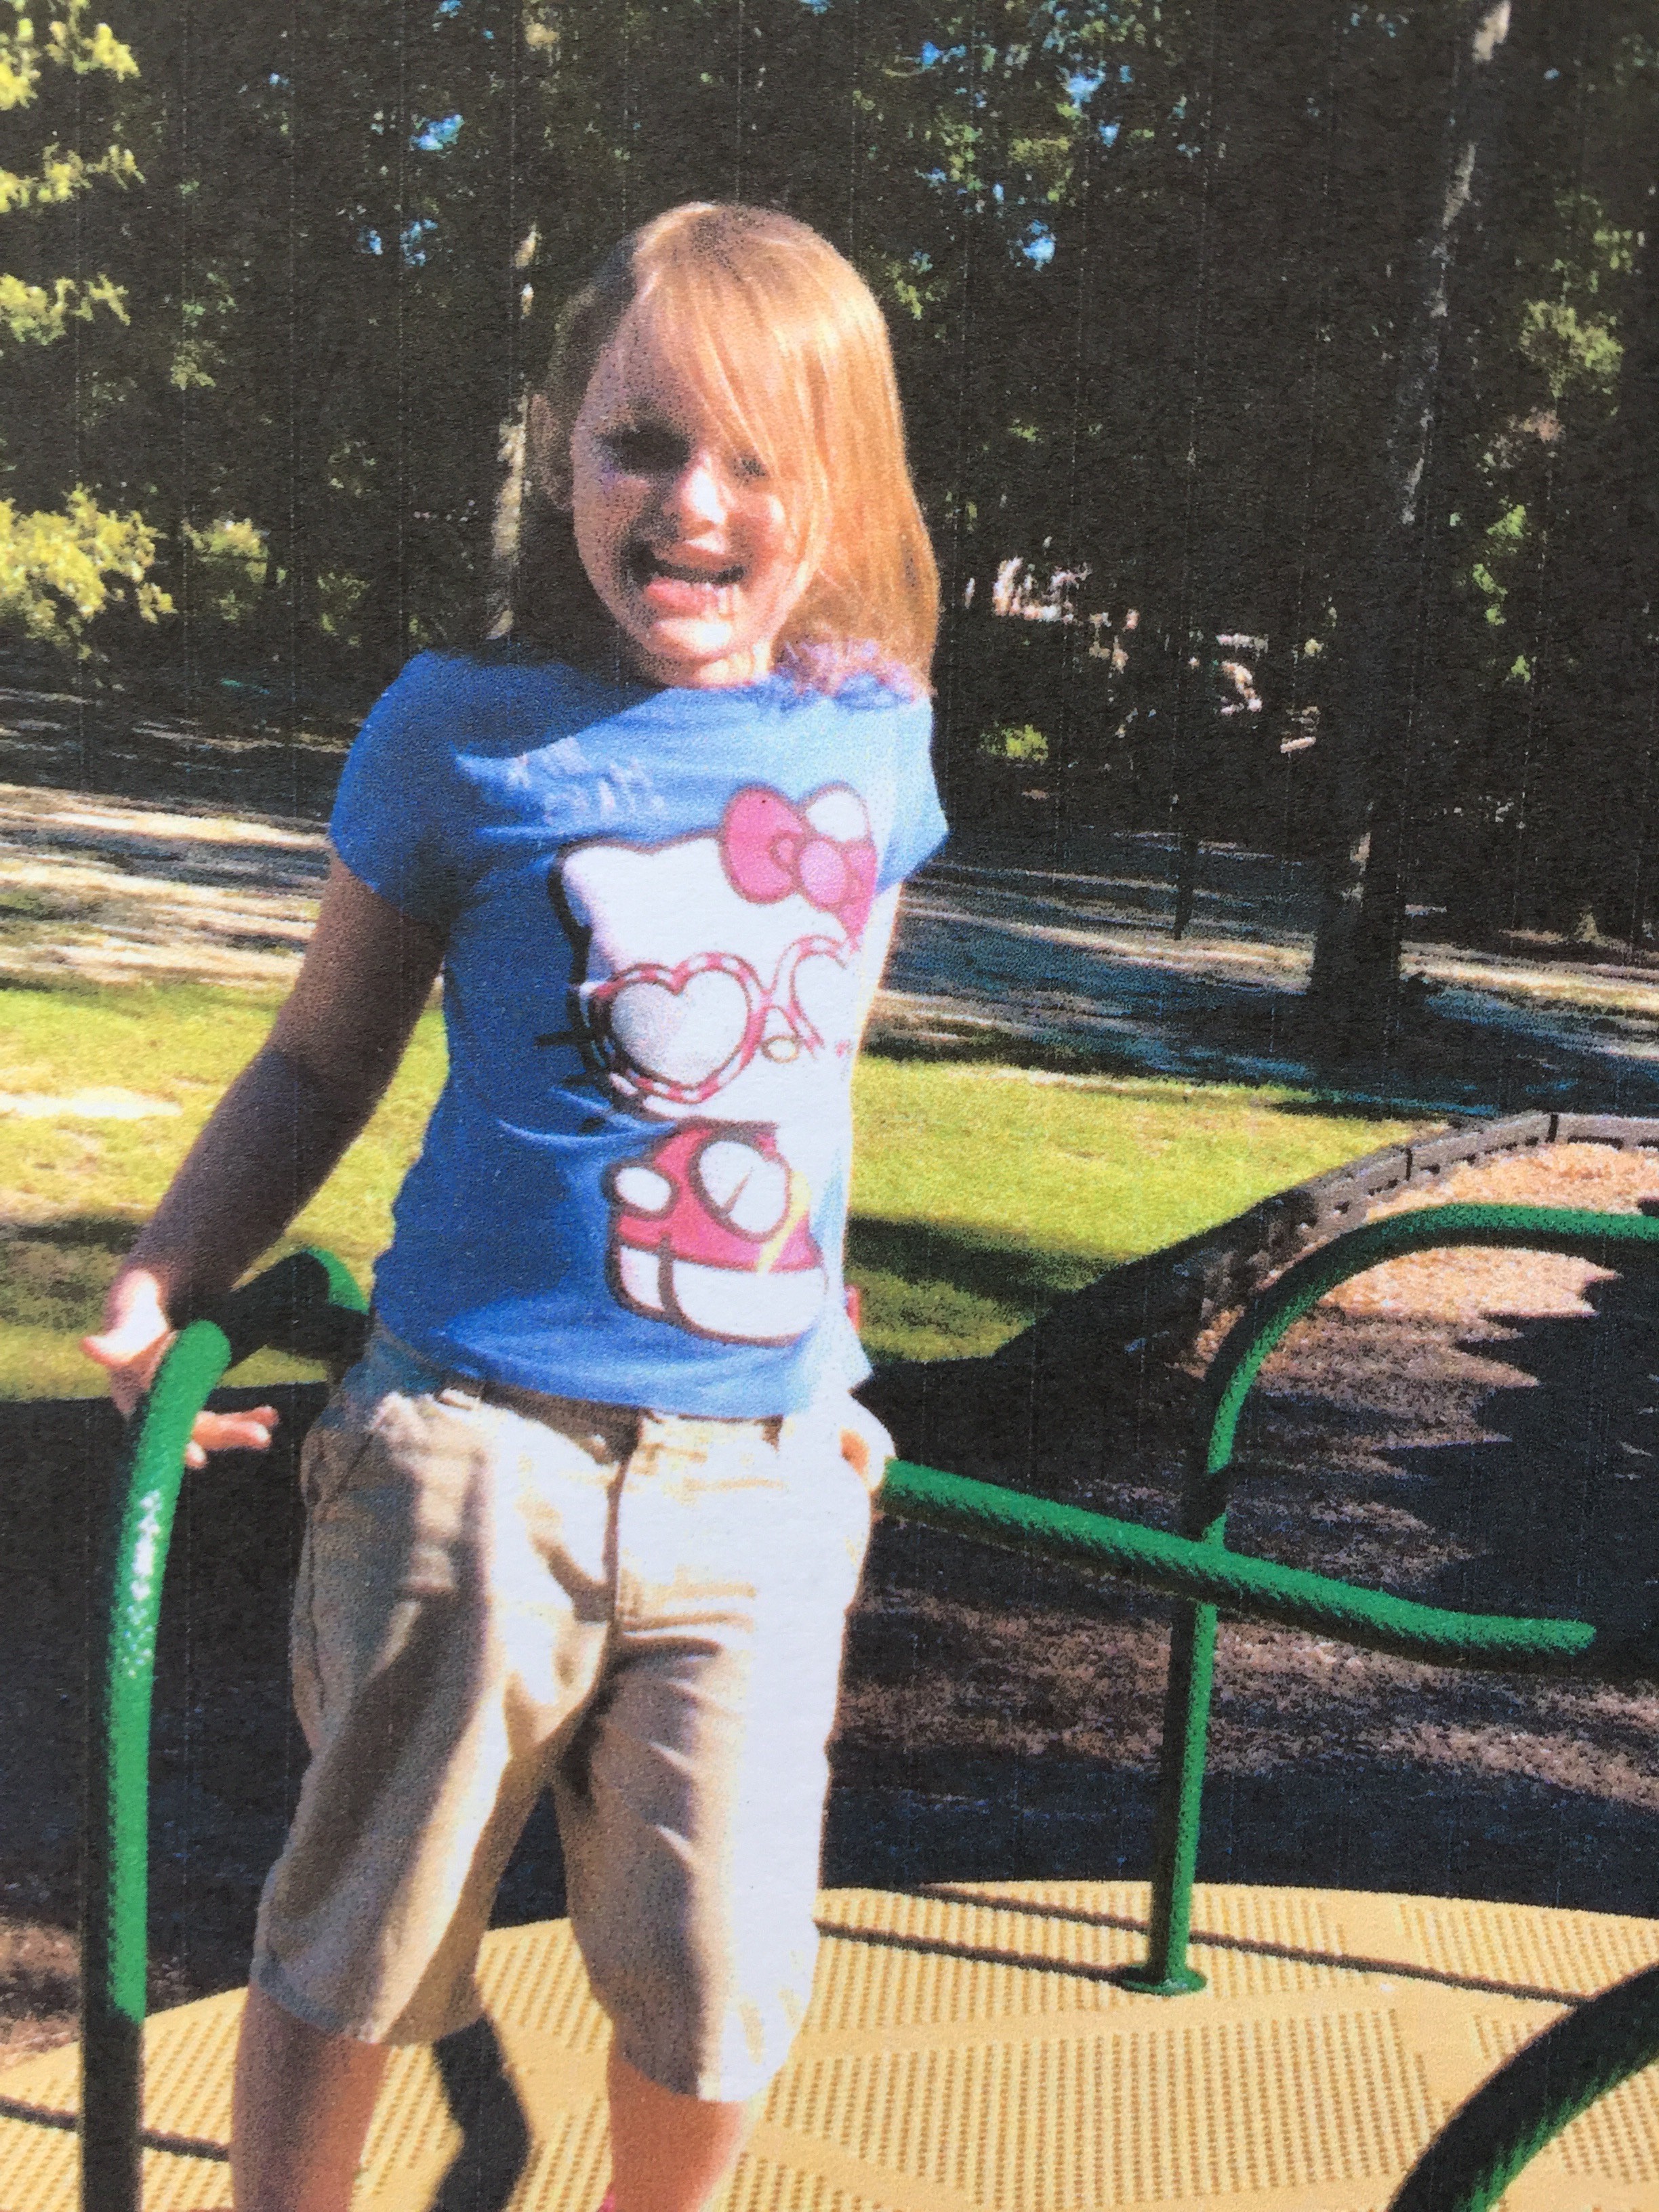 Update Missing 6 Year Old Found Safe 9785